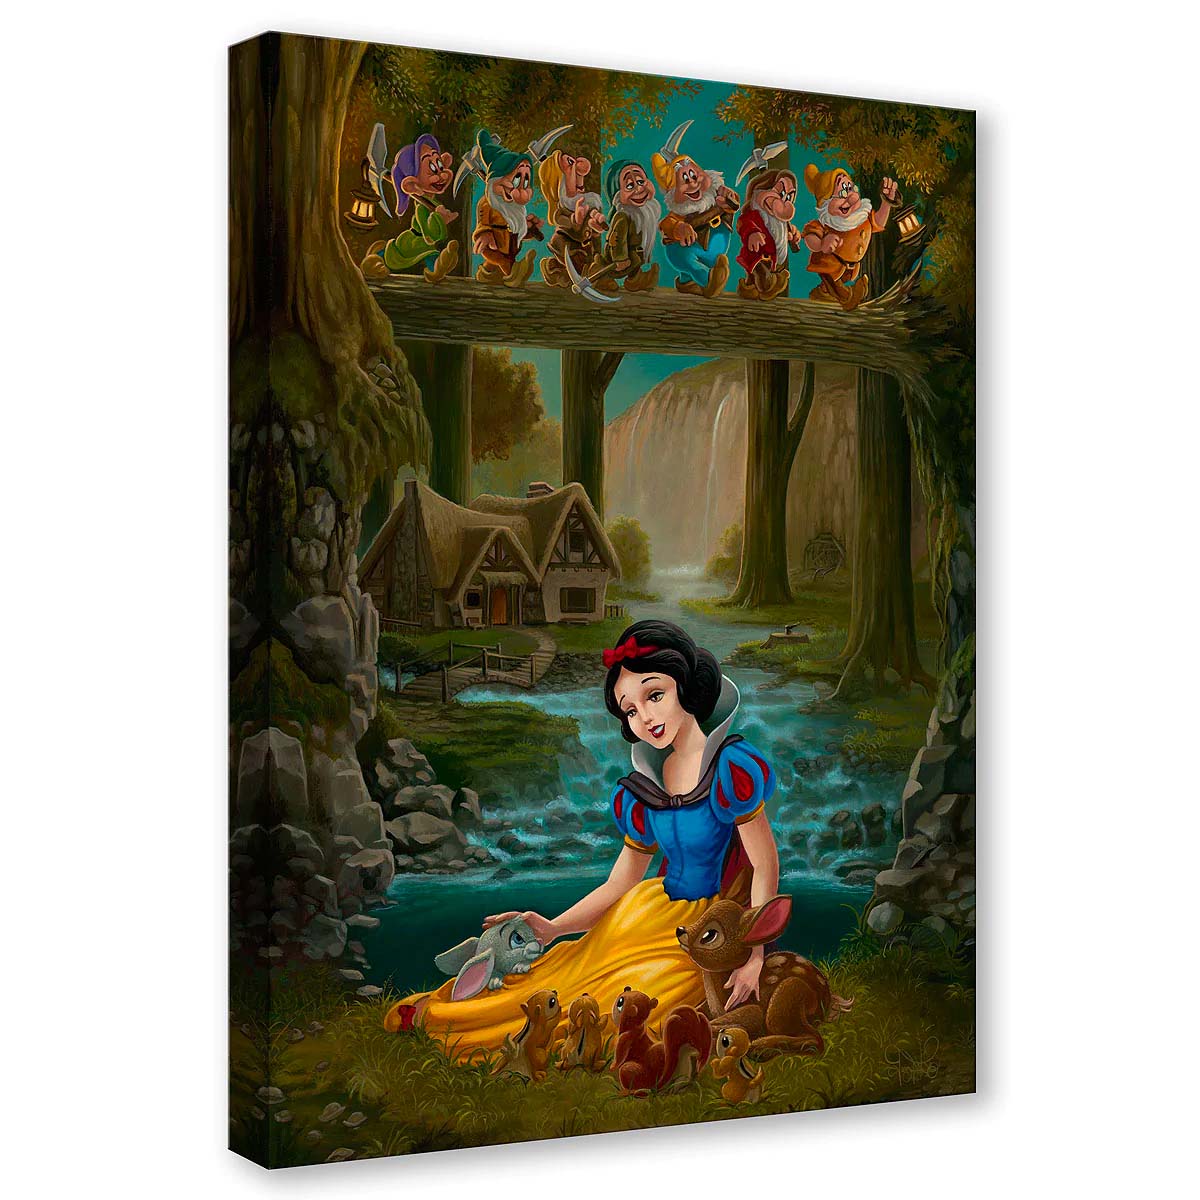 Jared Franco Disney "Snow White's Sanctuary" Limited Edition Canvas Giclee